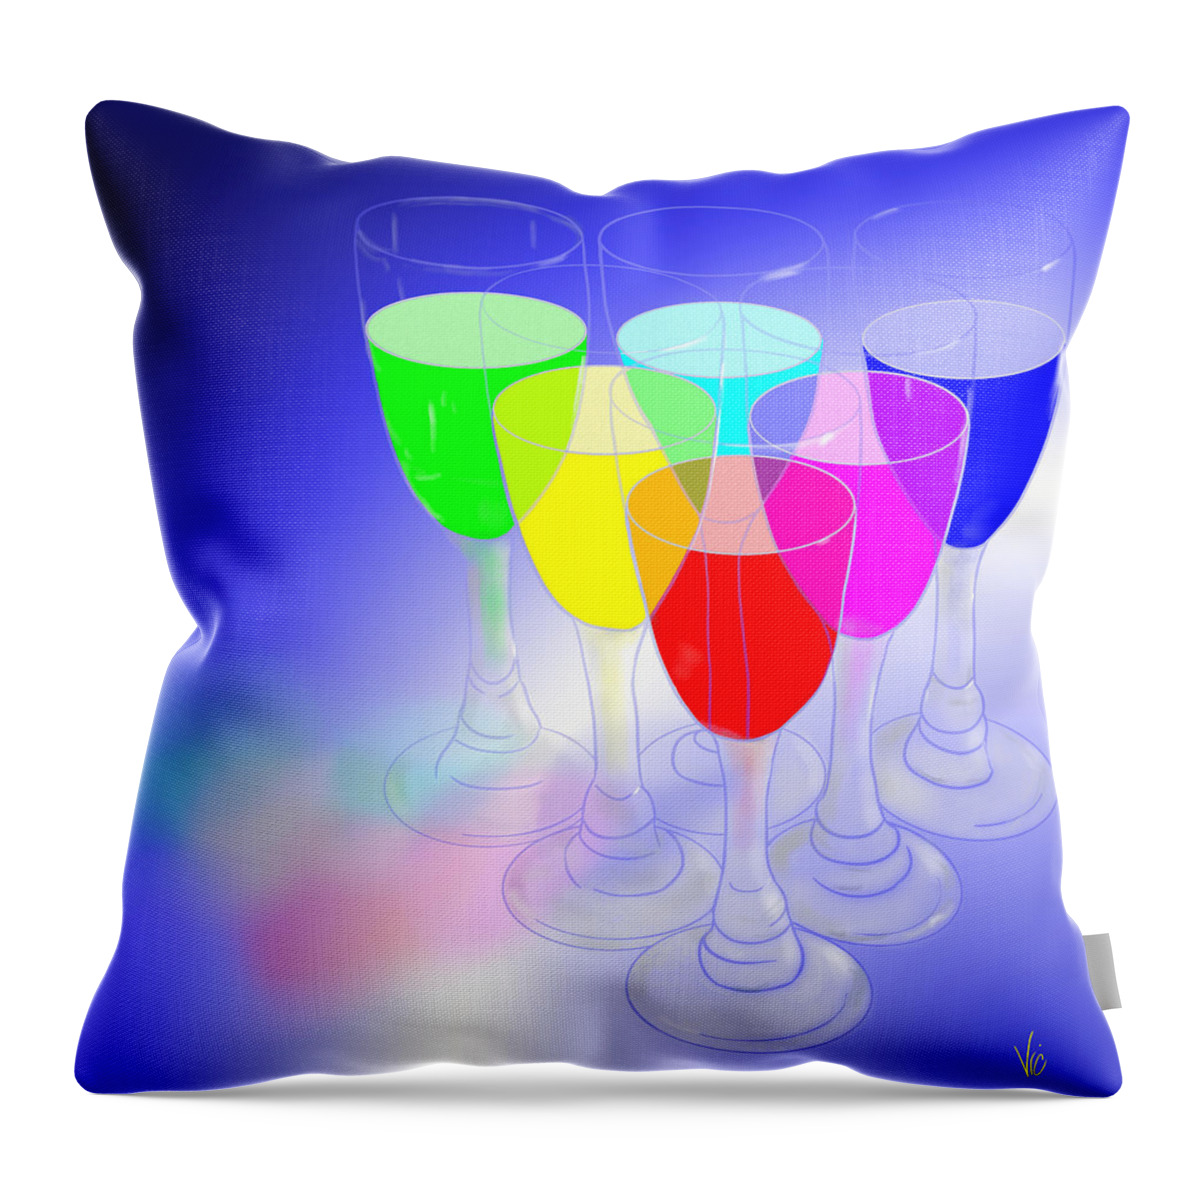 Victor Shelley Throw Pillow featuring the digital art Additive Light by Victor Shelley